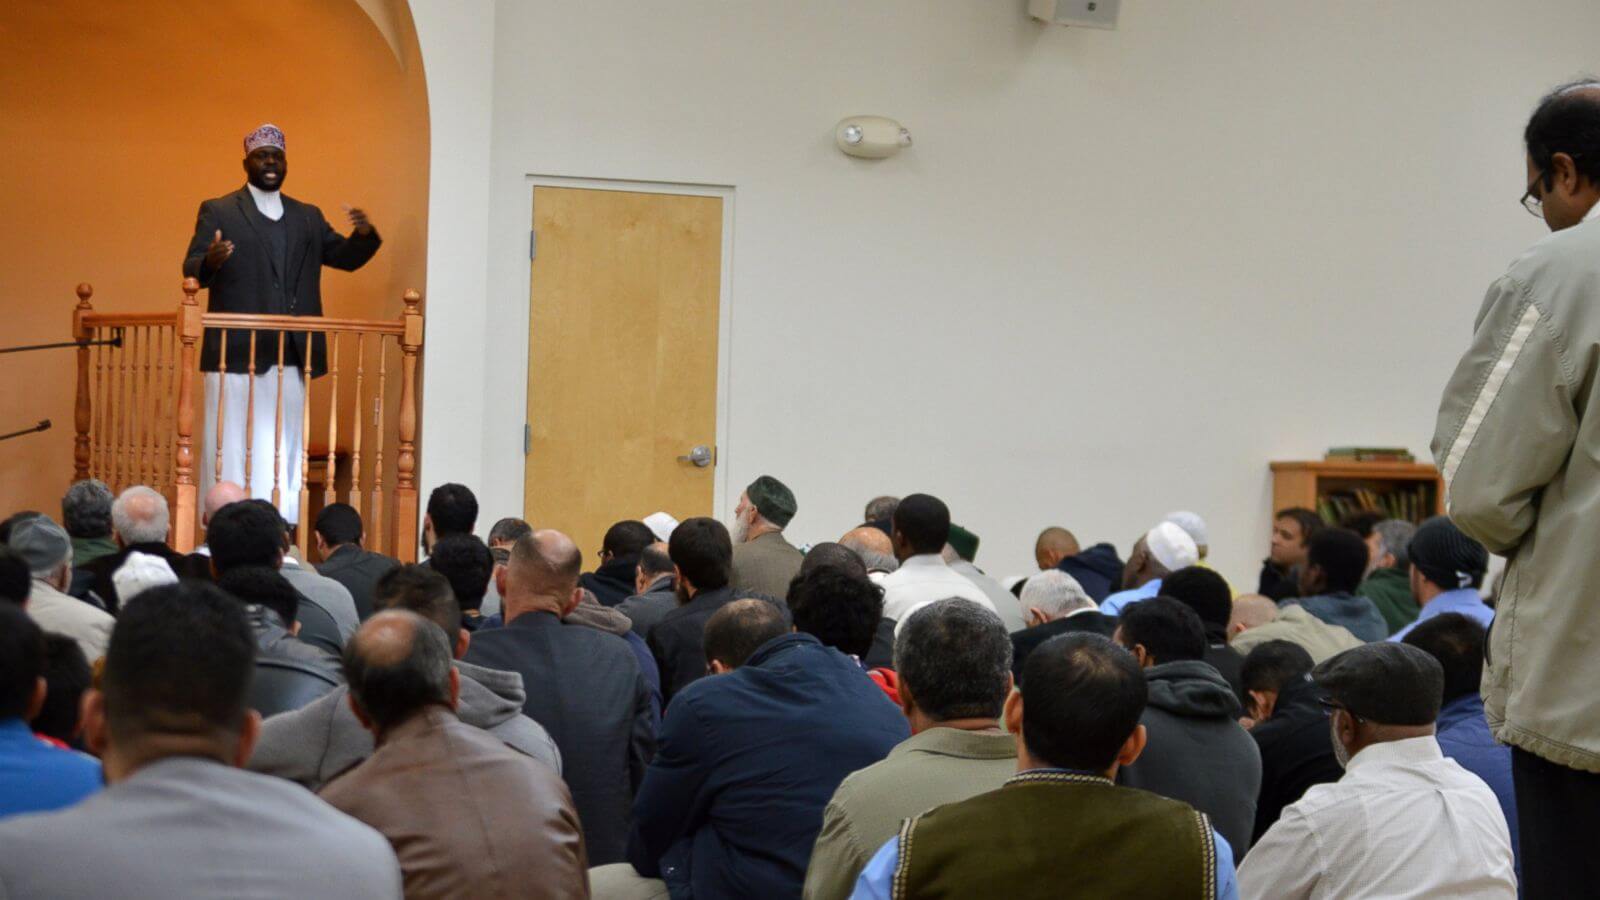 Imam Shafi Abdul Aziz, left, of the the Islamic Center of New Mexico in Albuquerque, speaks on the importance of tolerance during afternoon prayer Friday, Dec. 11, 2015. A coalition from Albuquerque's Christian and Jewish communities presented the Albuquerque mosque dozens of "letters of support" after GOP presidential candidate Donald Trump advocated the U.S. place a moratorium on Muslim immigration. (AP Photo/Russell Contreras) 